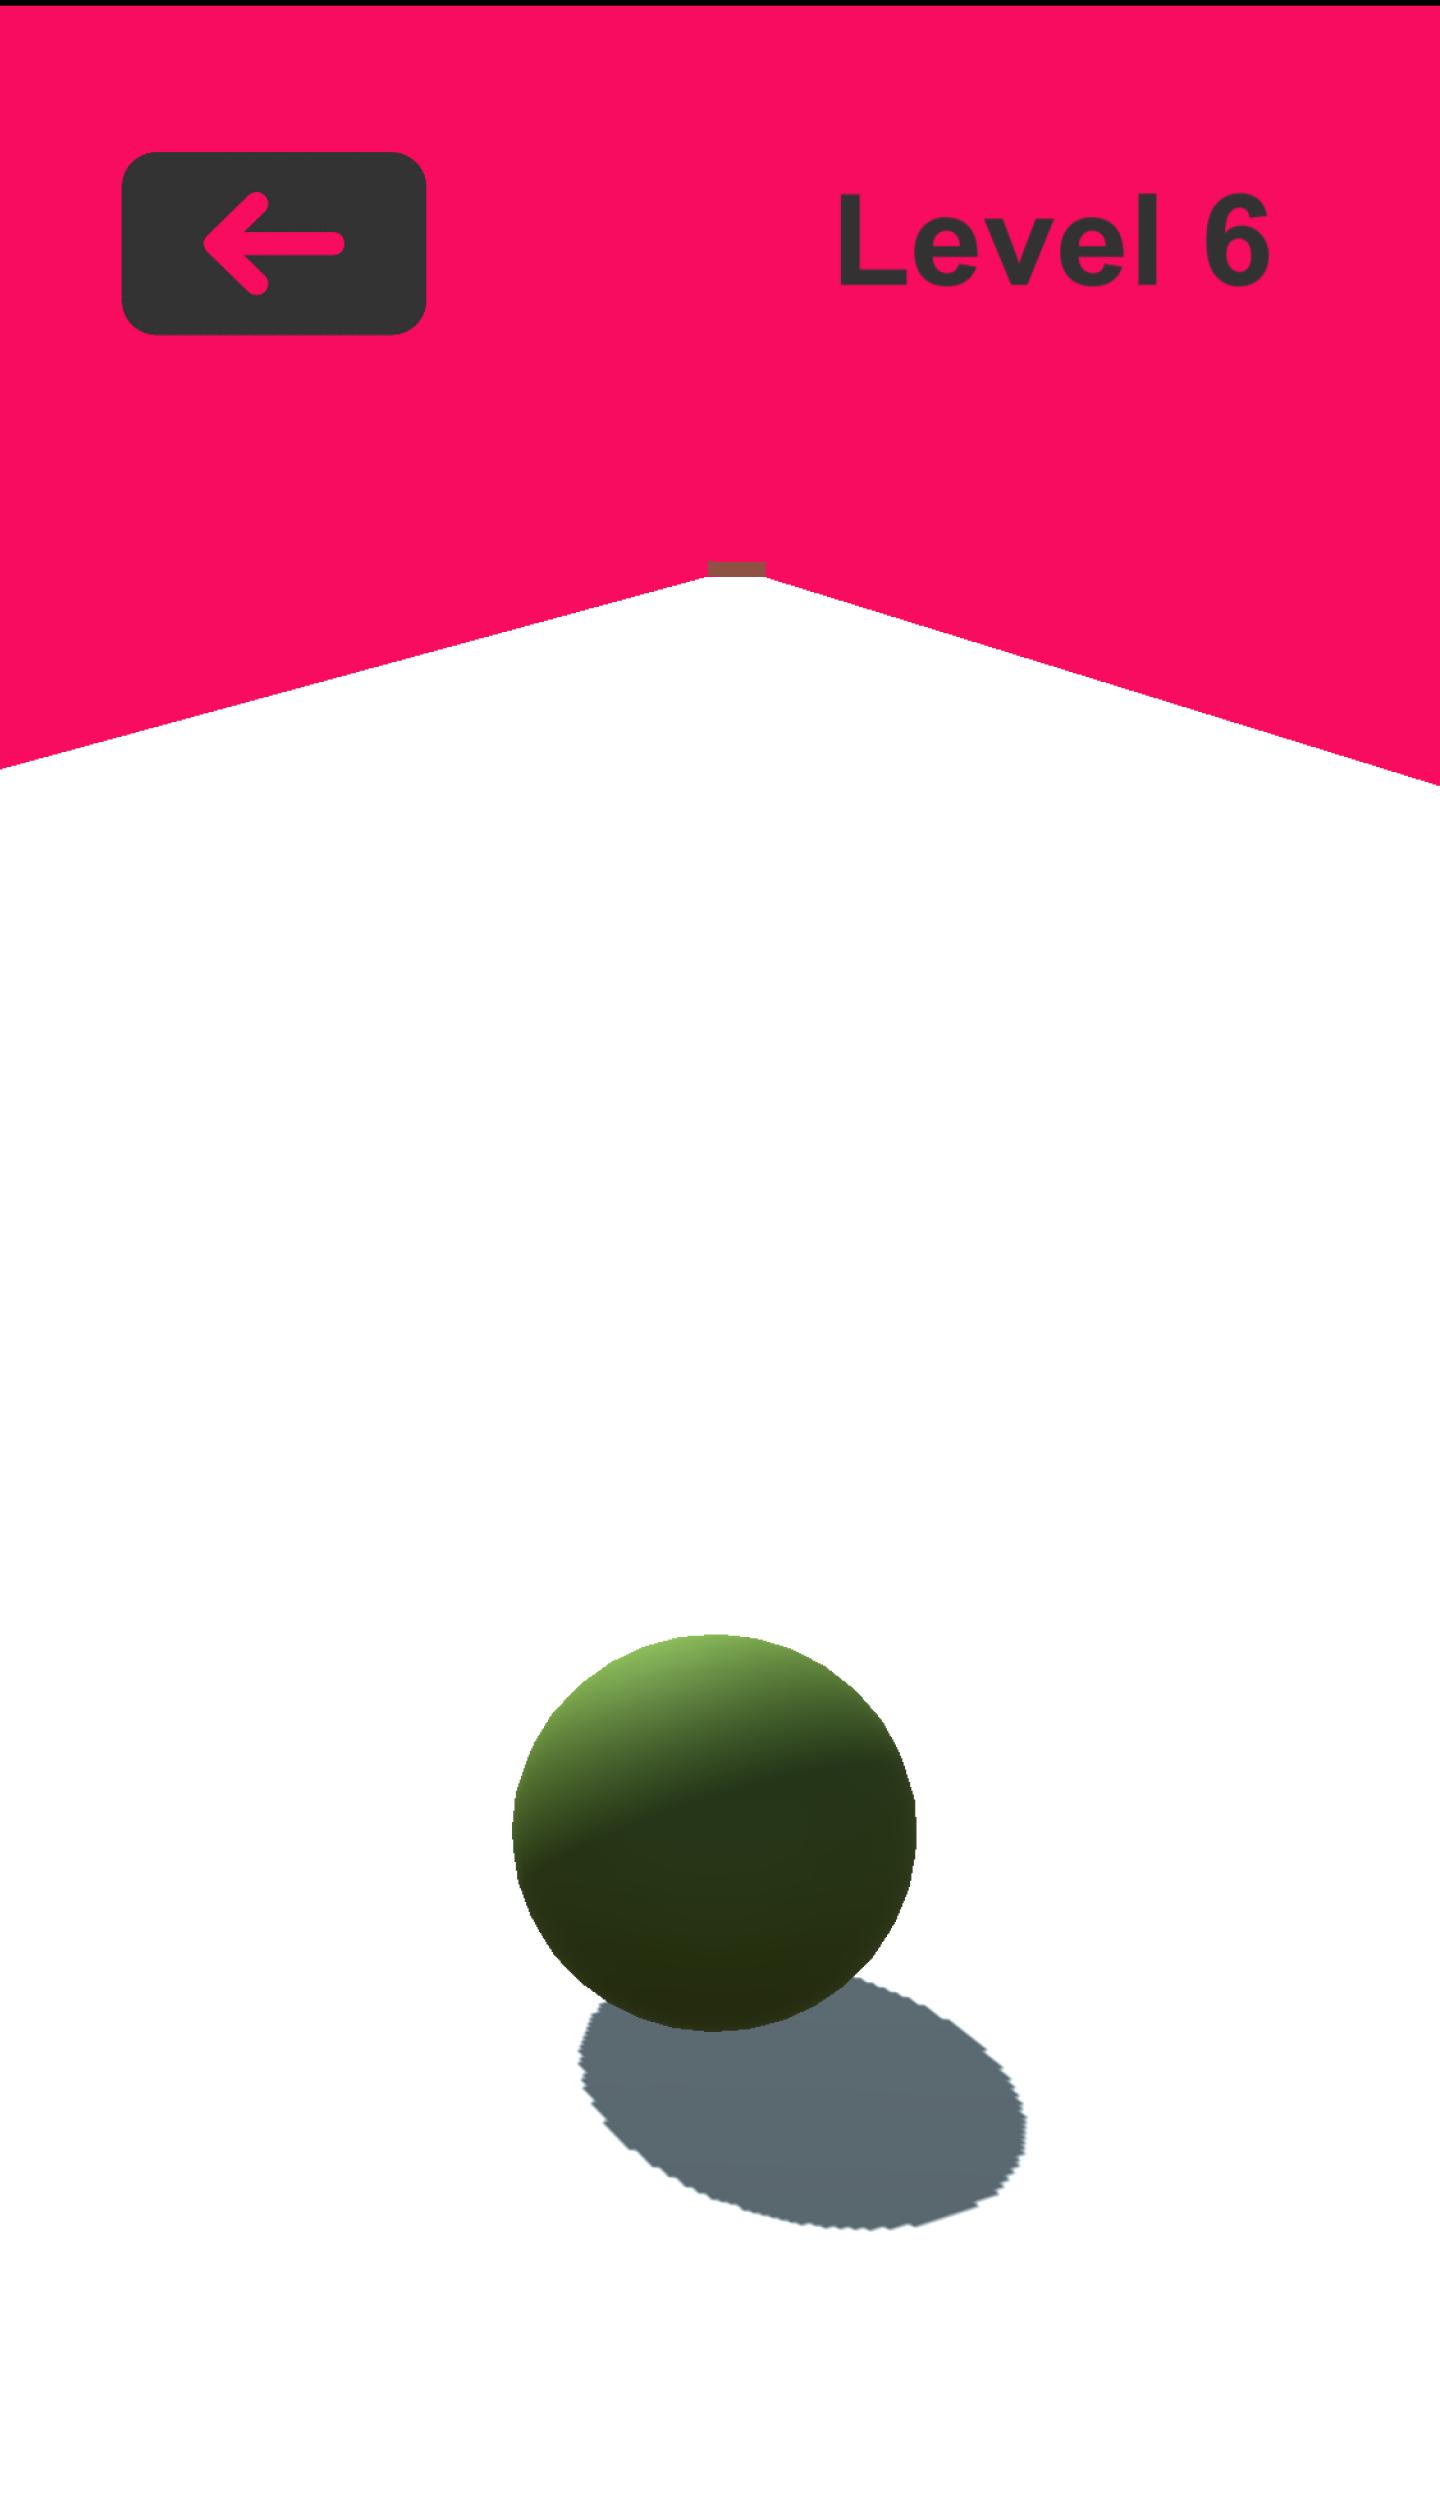 Gyro Ball Run for Android - APK Download